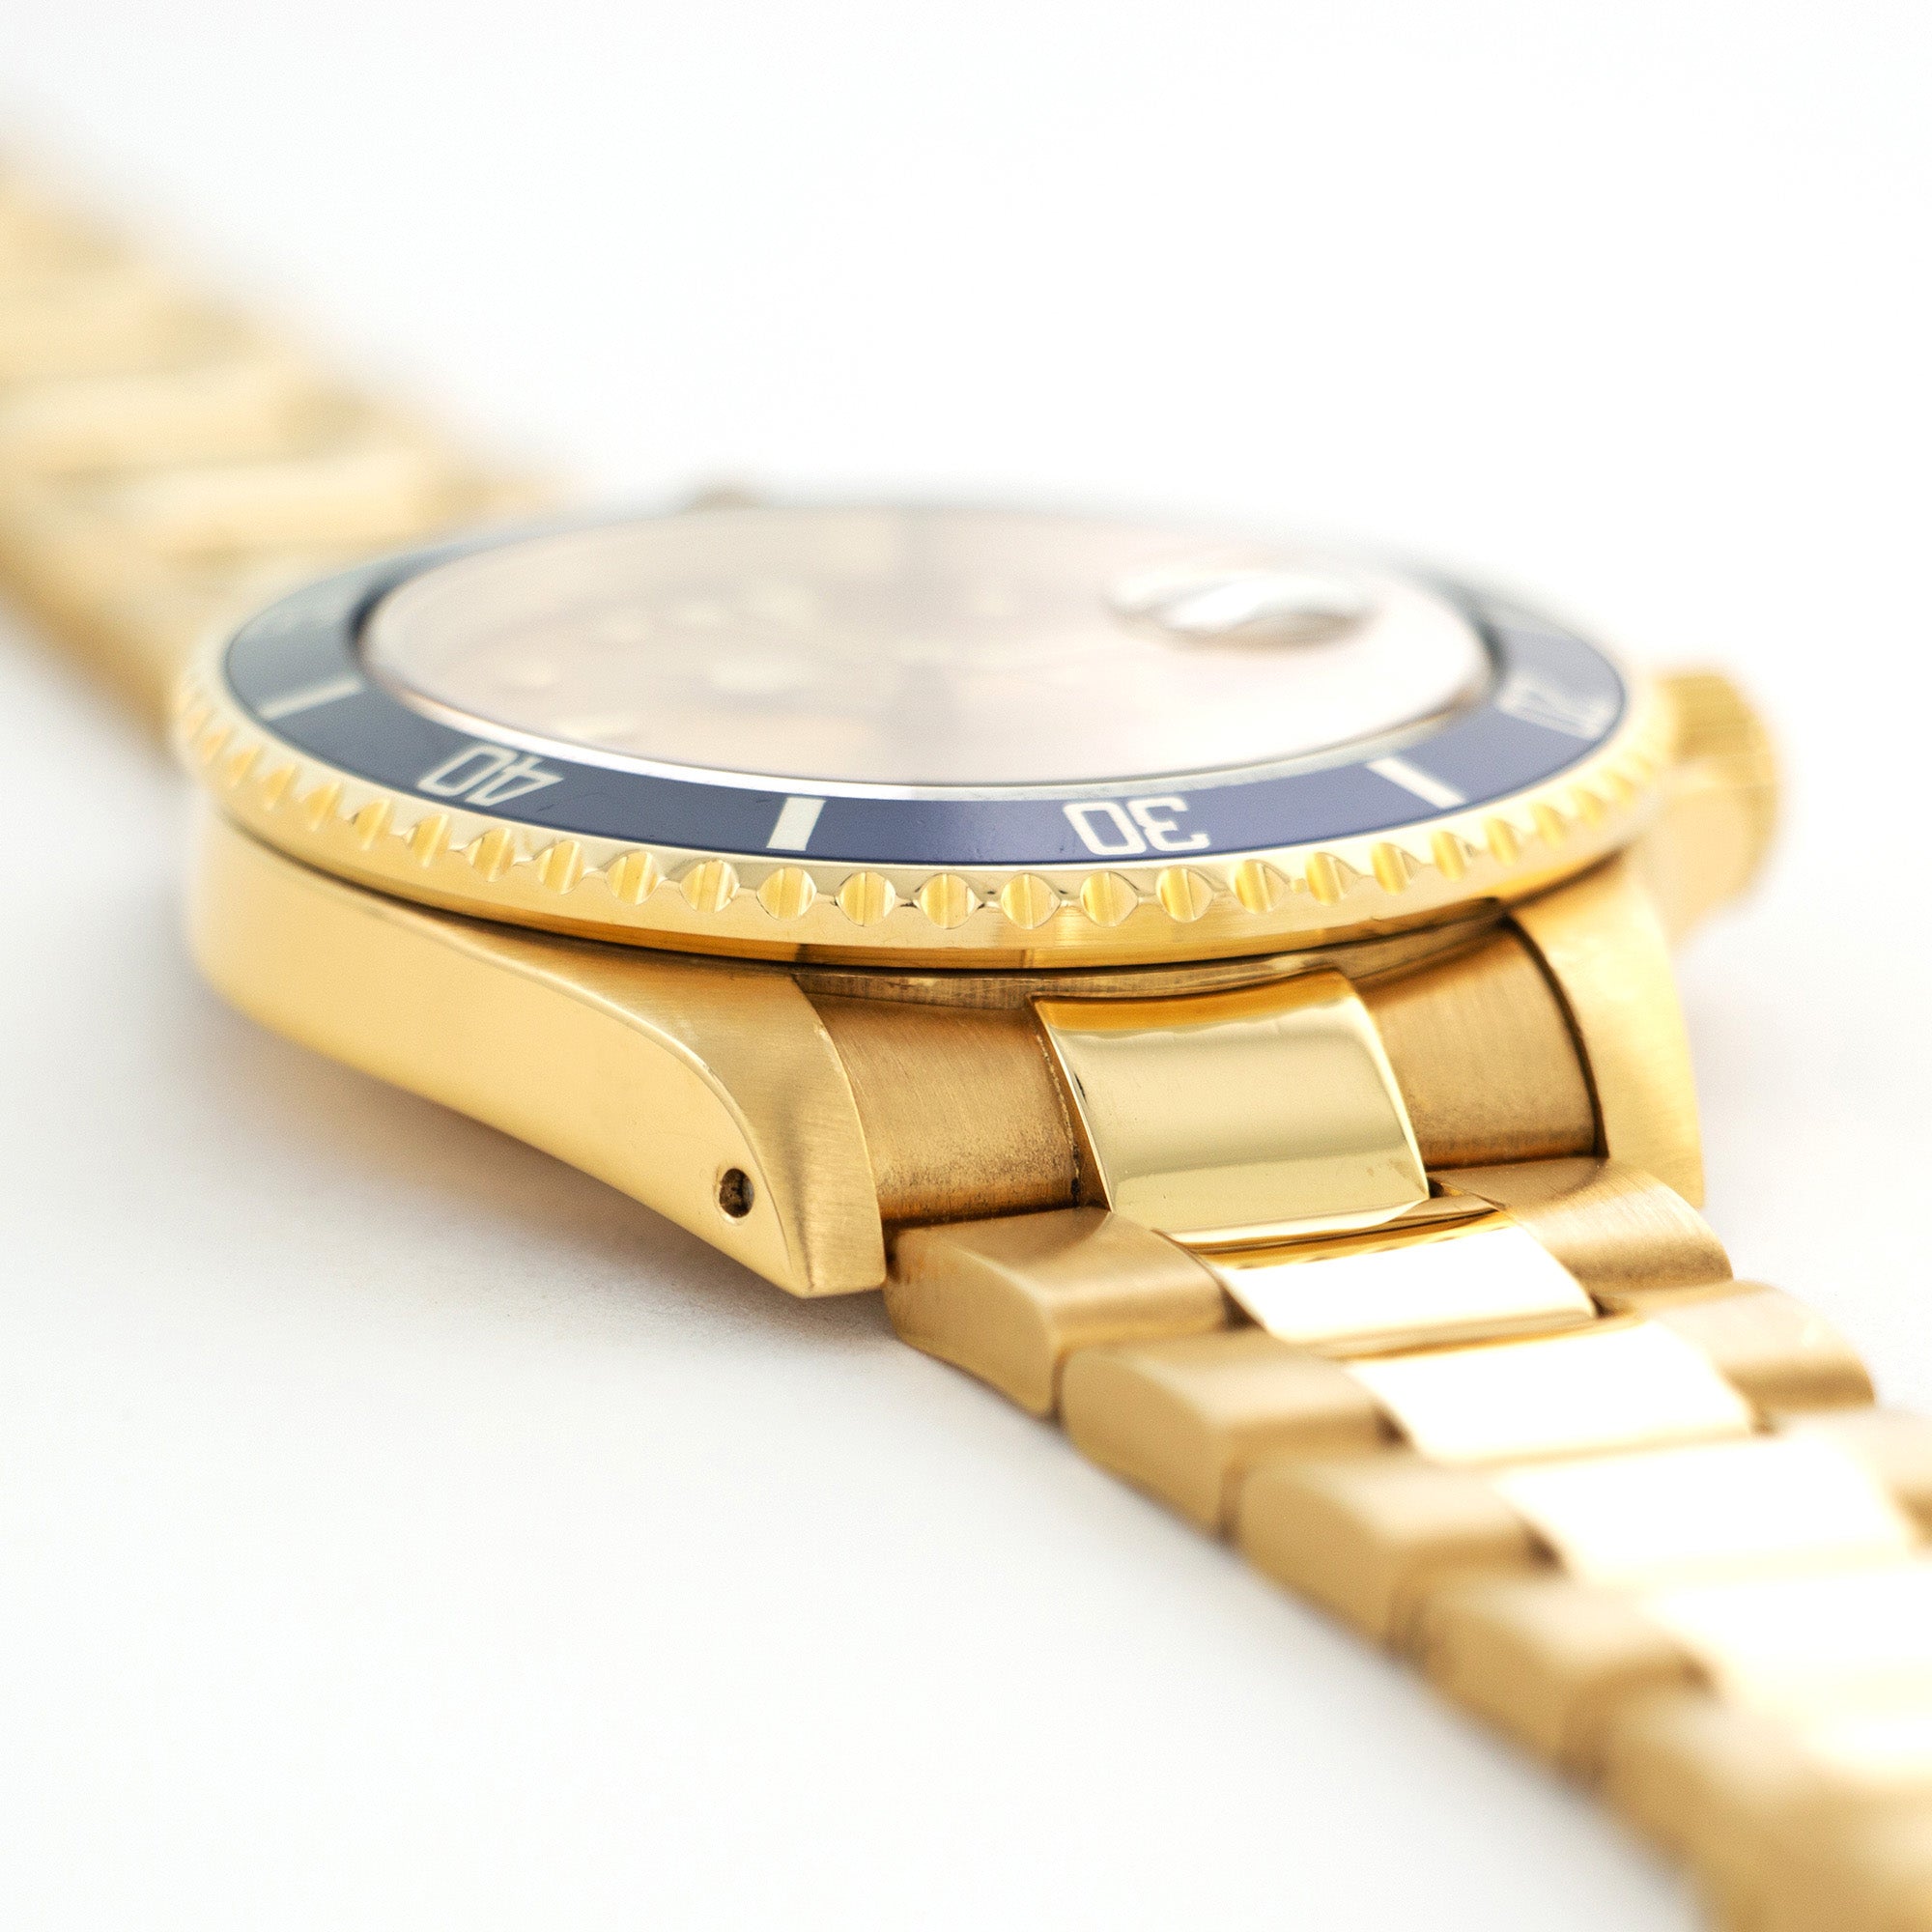 Rolex - Rolex Yellow Gold Submariner Tropical Dial Watch Ref. 16808 - The Keystone Watches